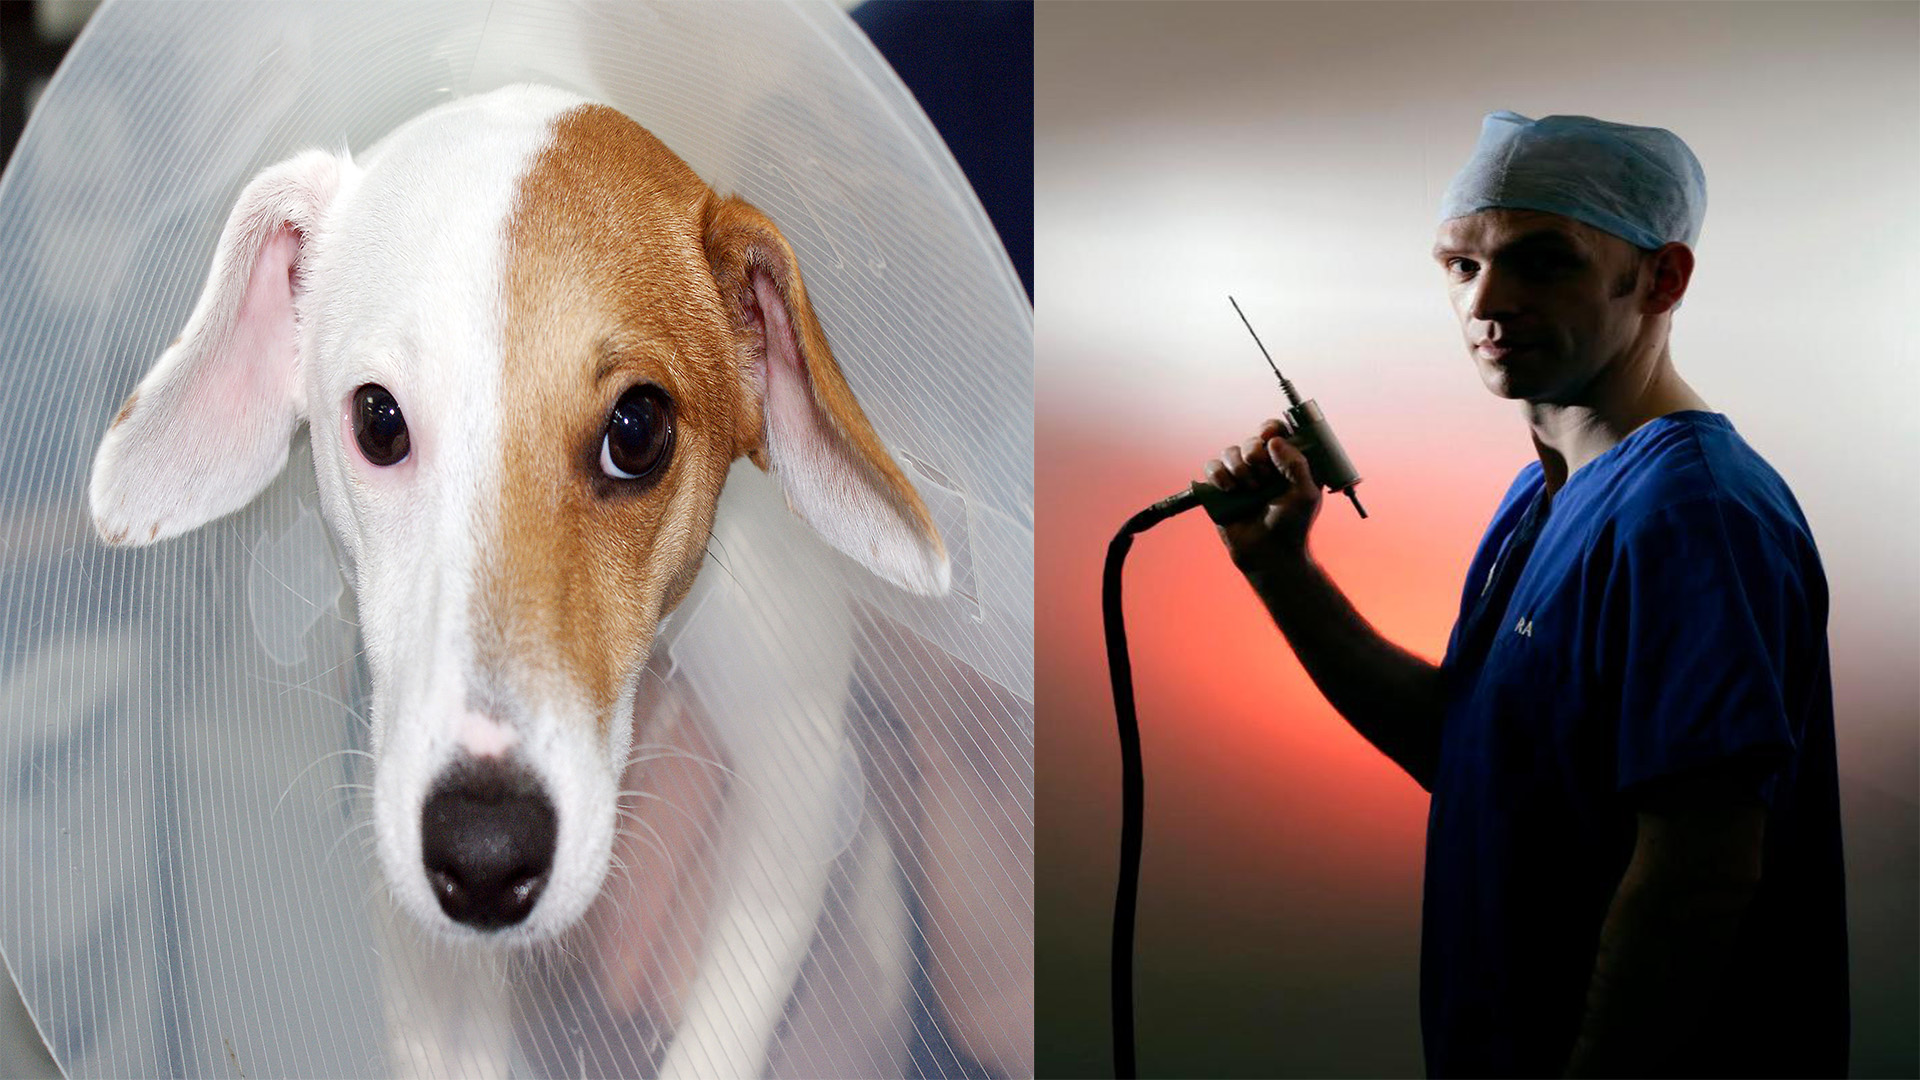 gender reassignment surgery for dogs